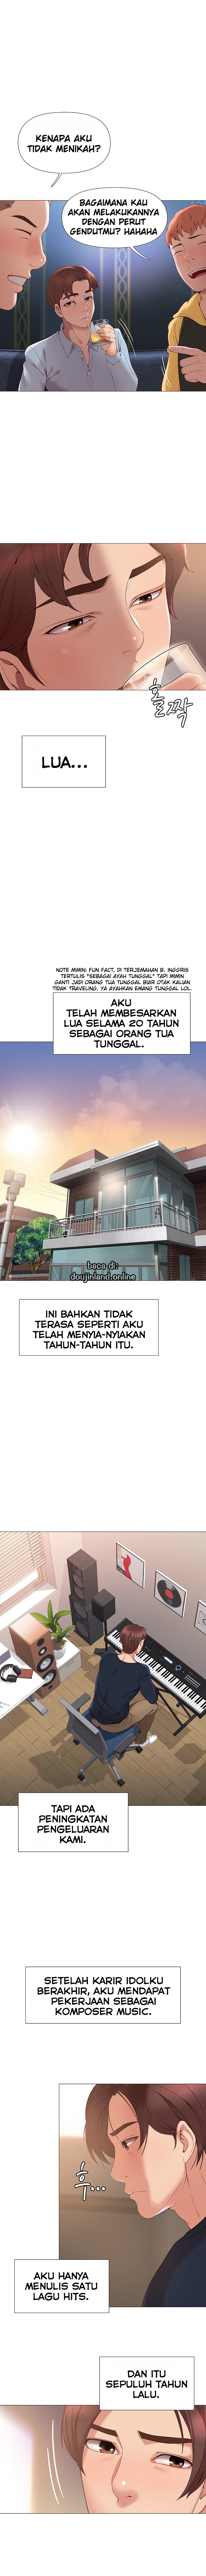 doujinland-daughter friend-chapter-01-bahasa-indonesia